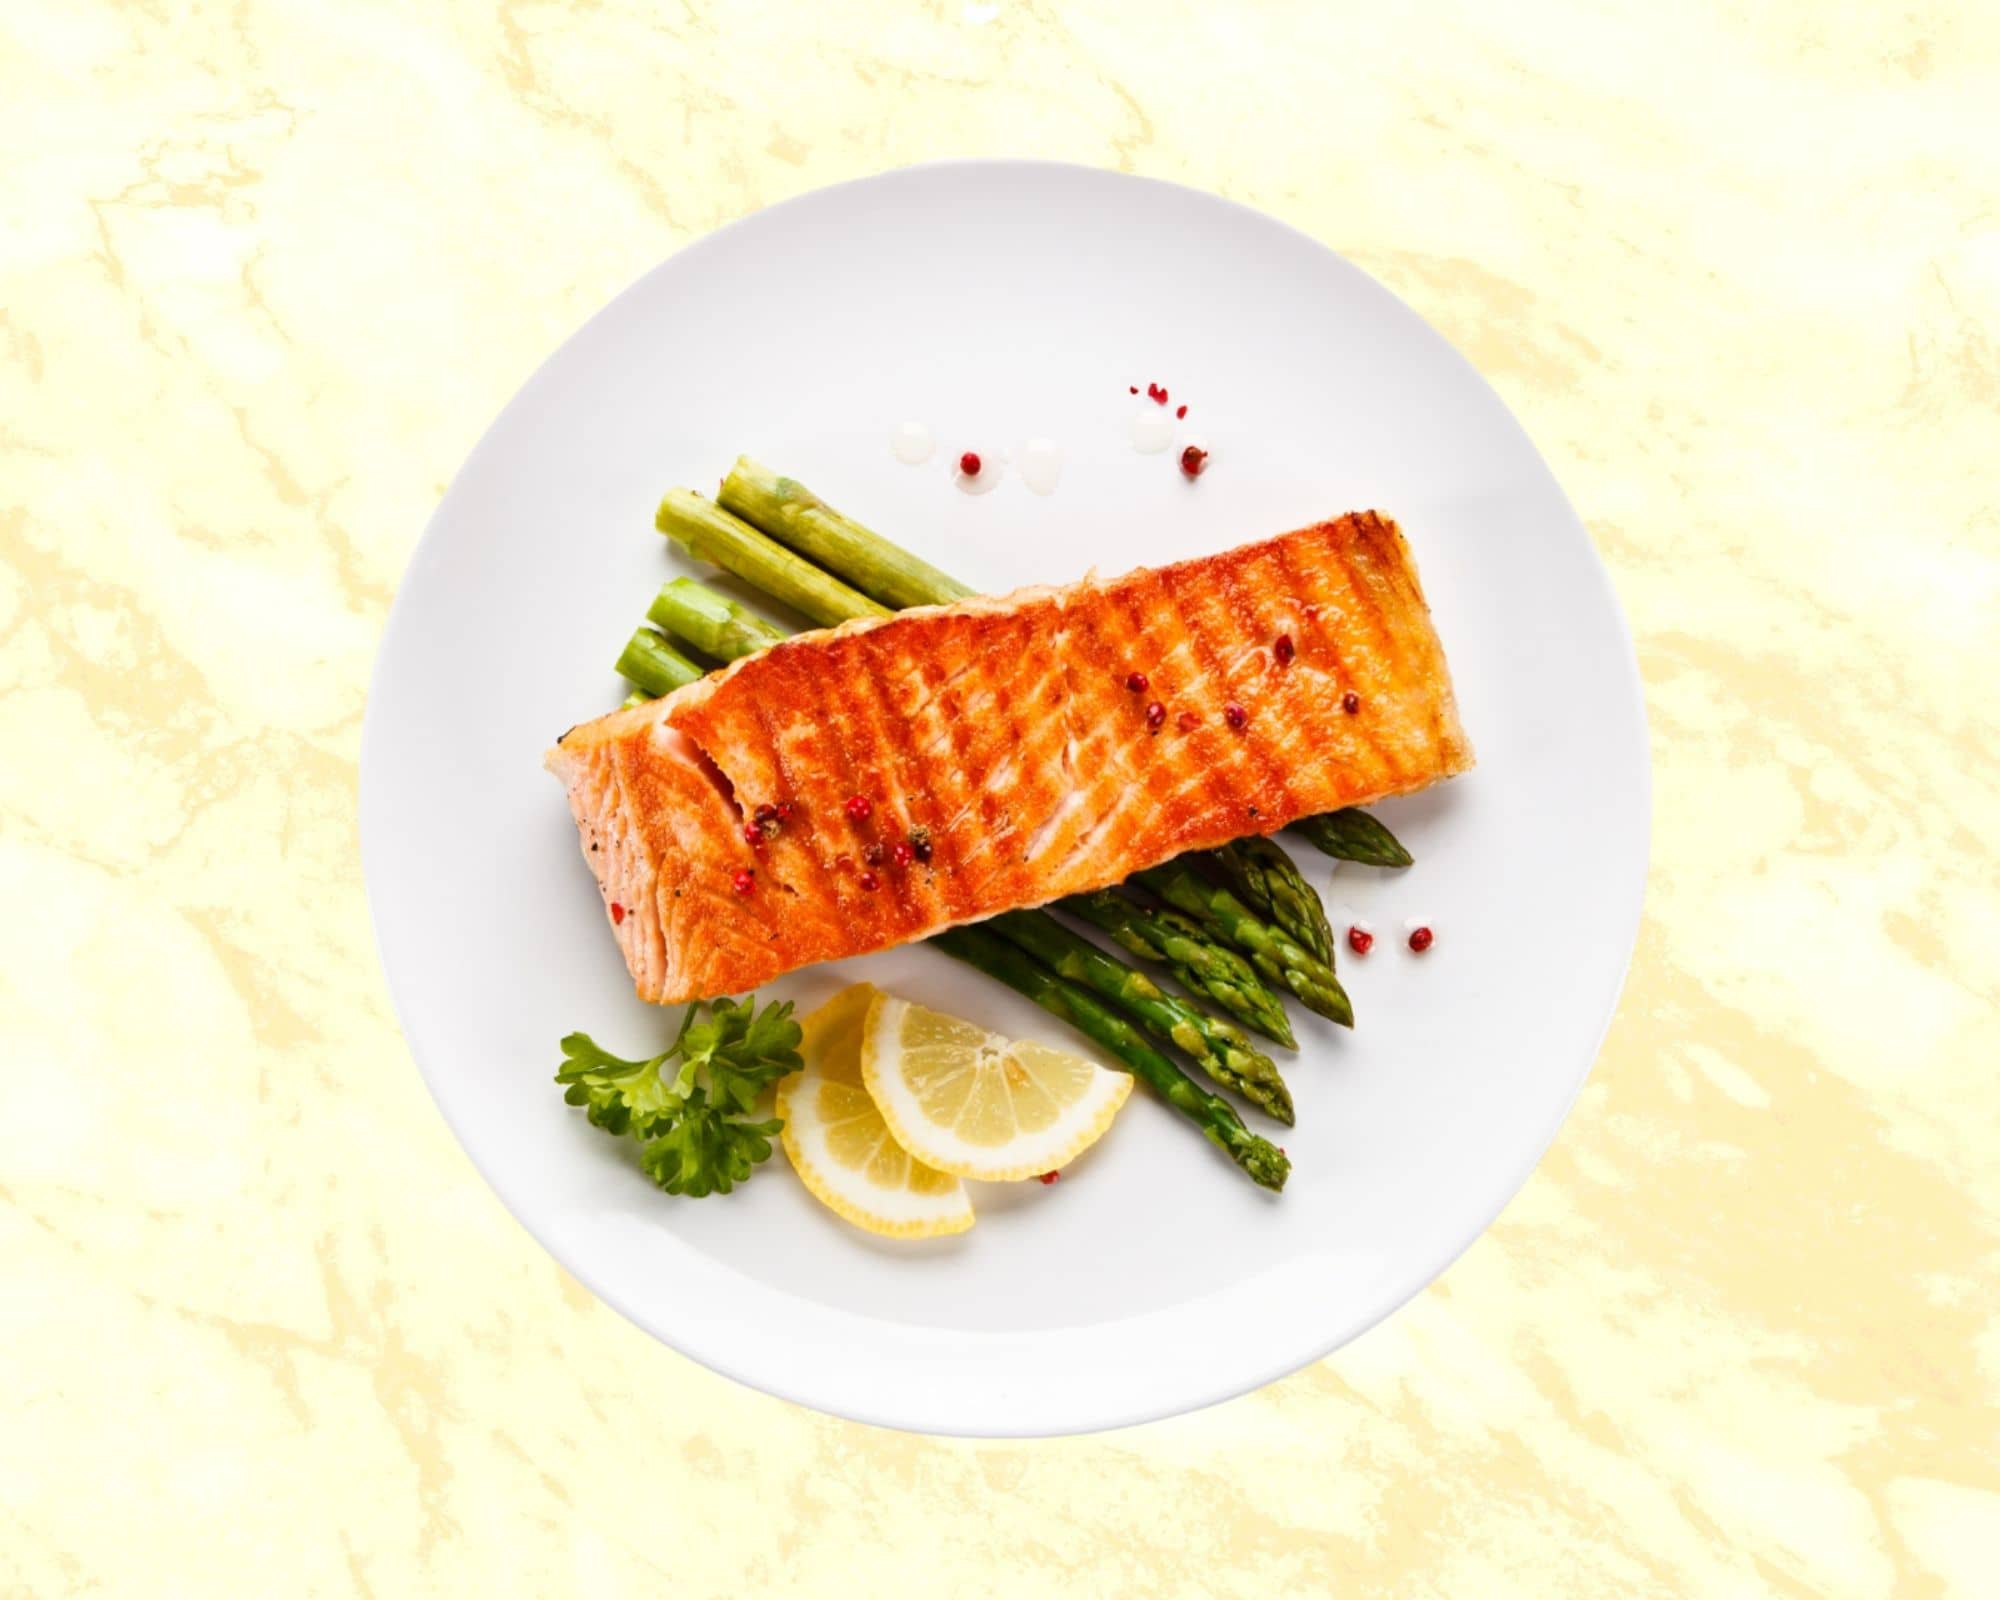 Foods That Help With Concentration - Salmon with Green Vegetables